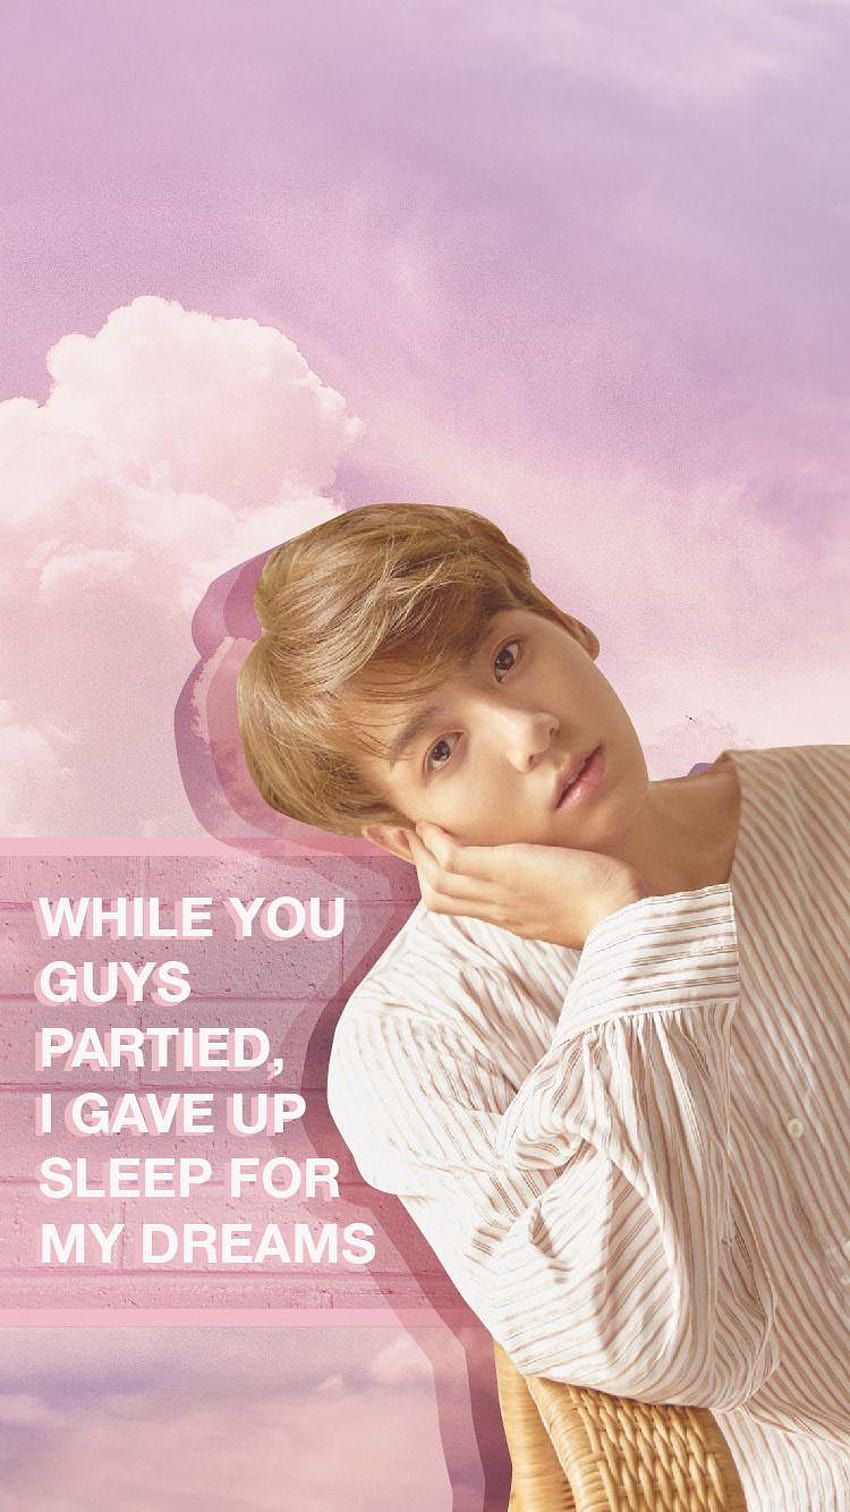 While you guys partied, I gave up sleep for my dreams - Jungkook